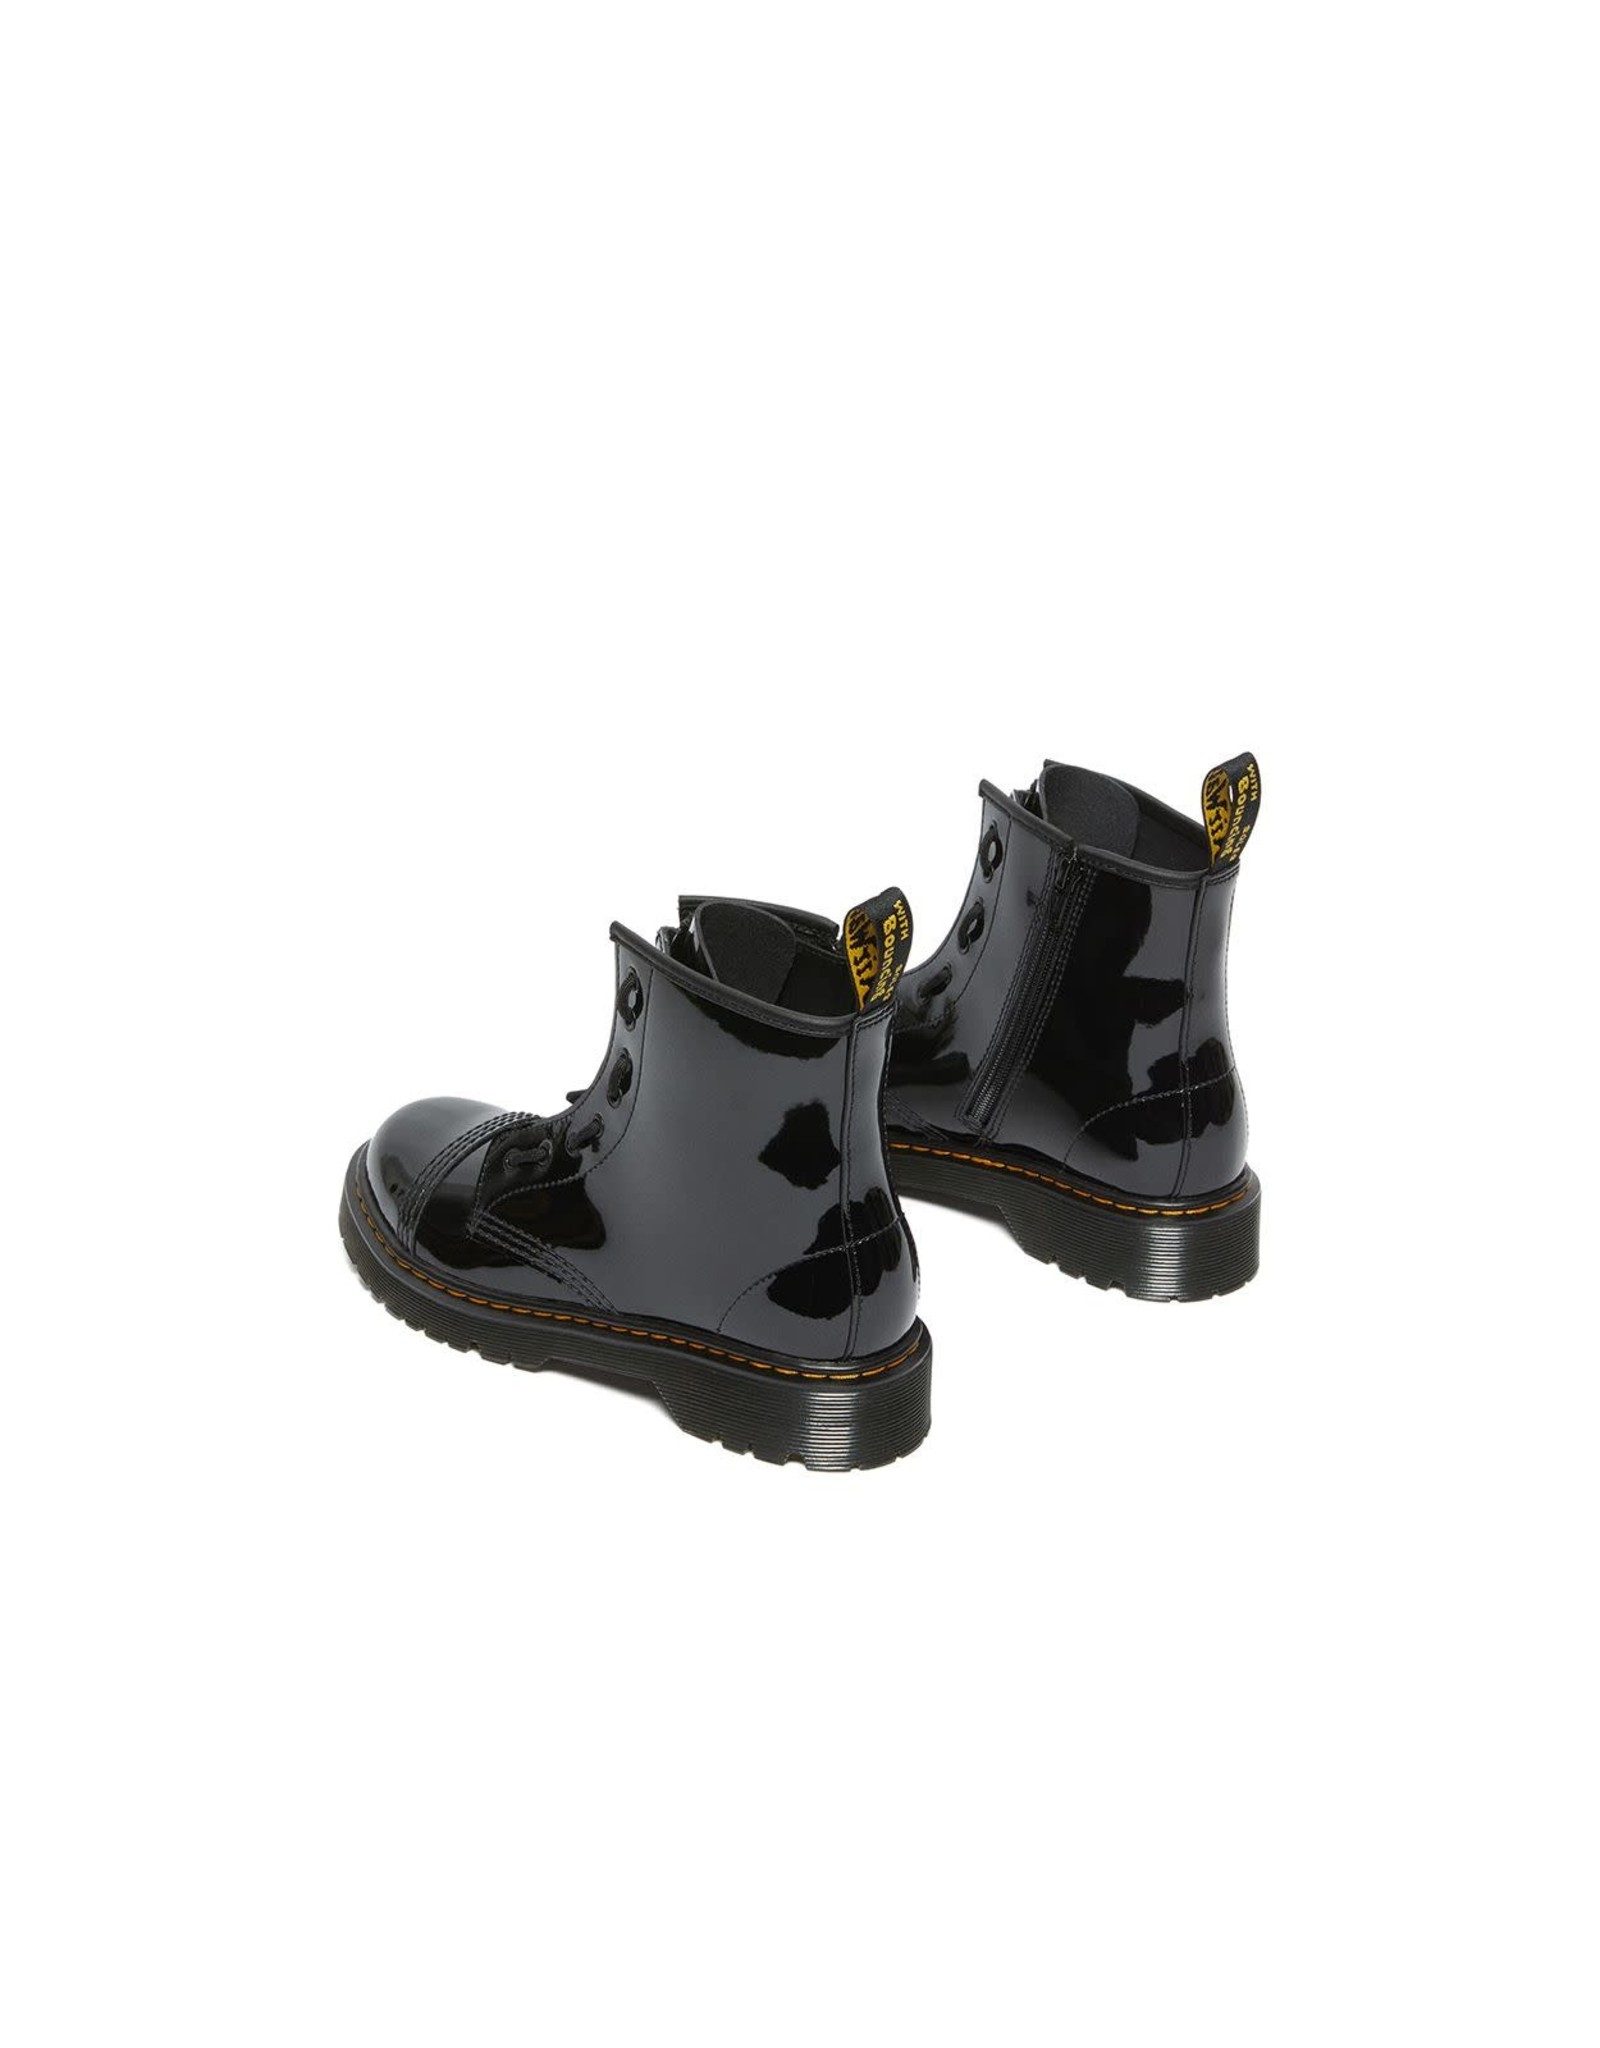 SINCLAIR BEX YOUTH PATENT BLACK Y851YPBEX - R27523001